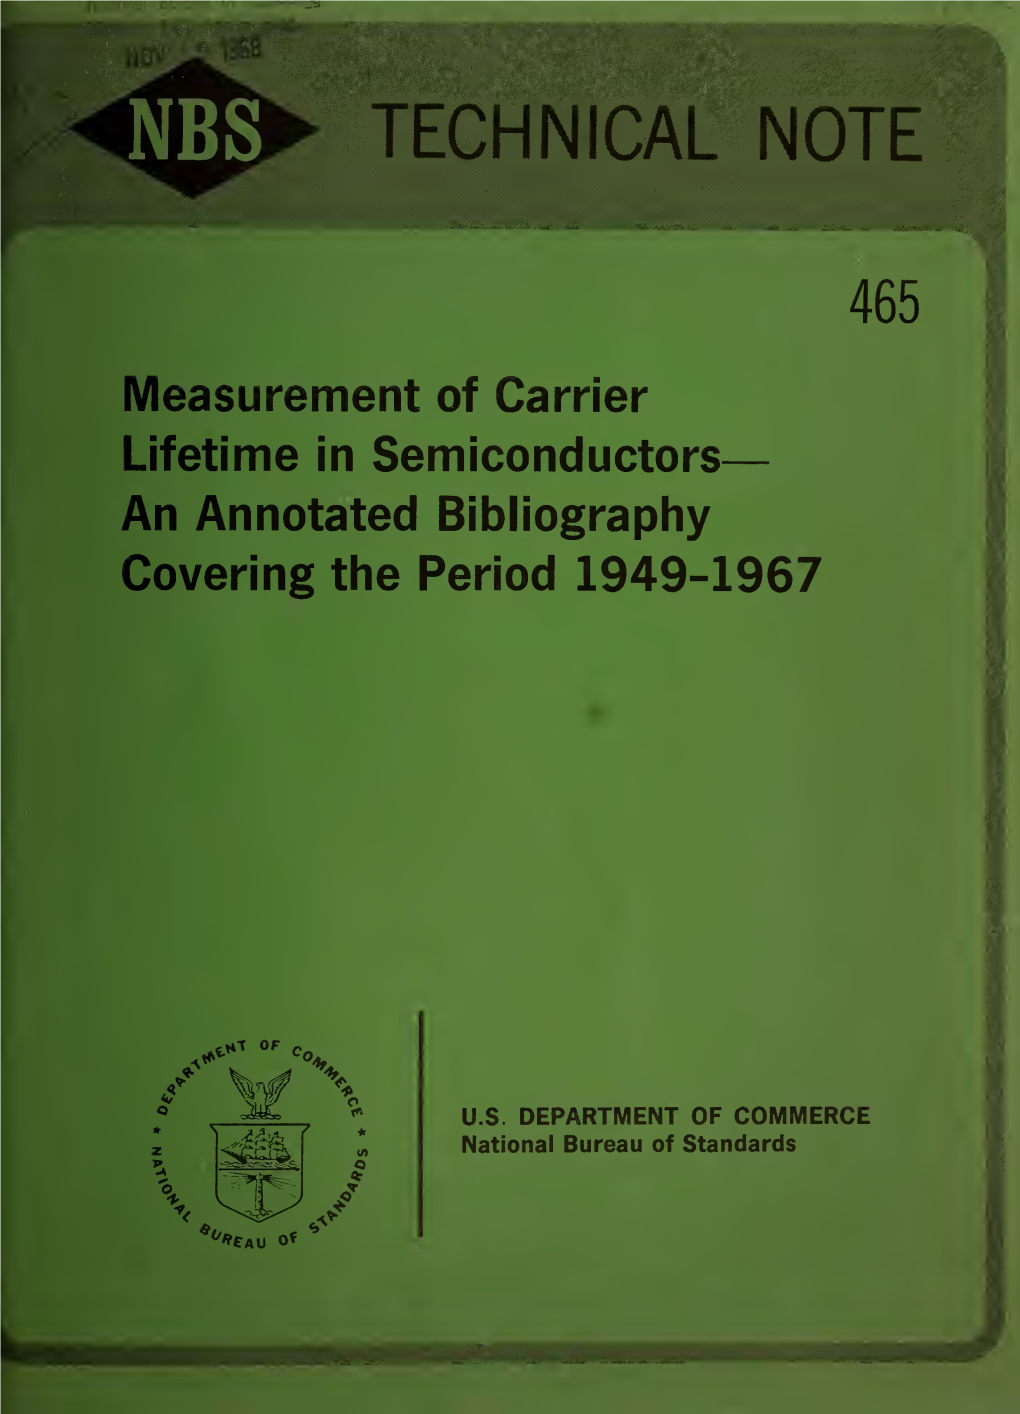 Measurement of Carrier Lifetime in Semiconductors an Annotated Bibliography Covering the Period 1949-1967